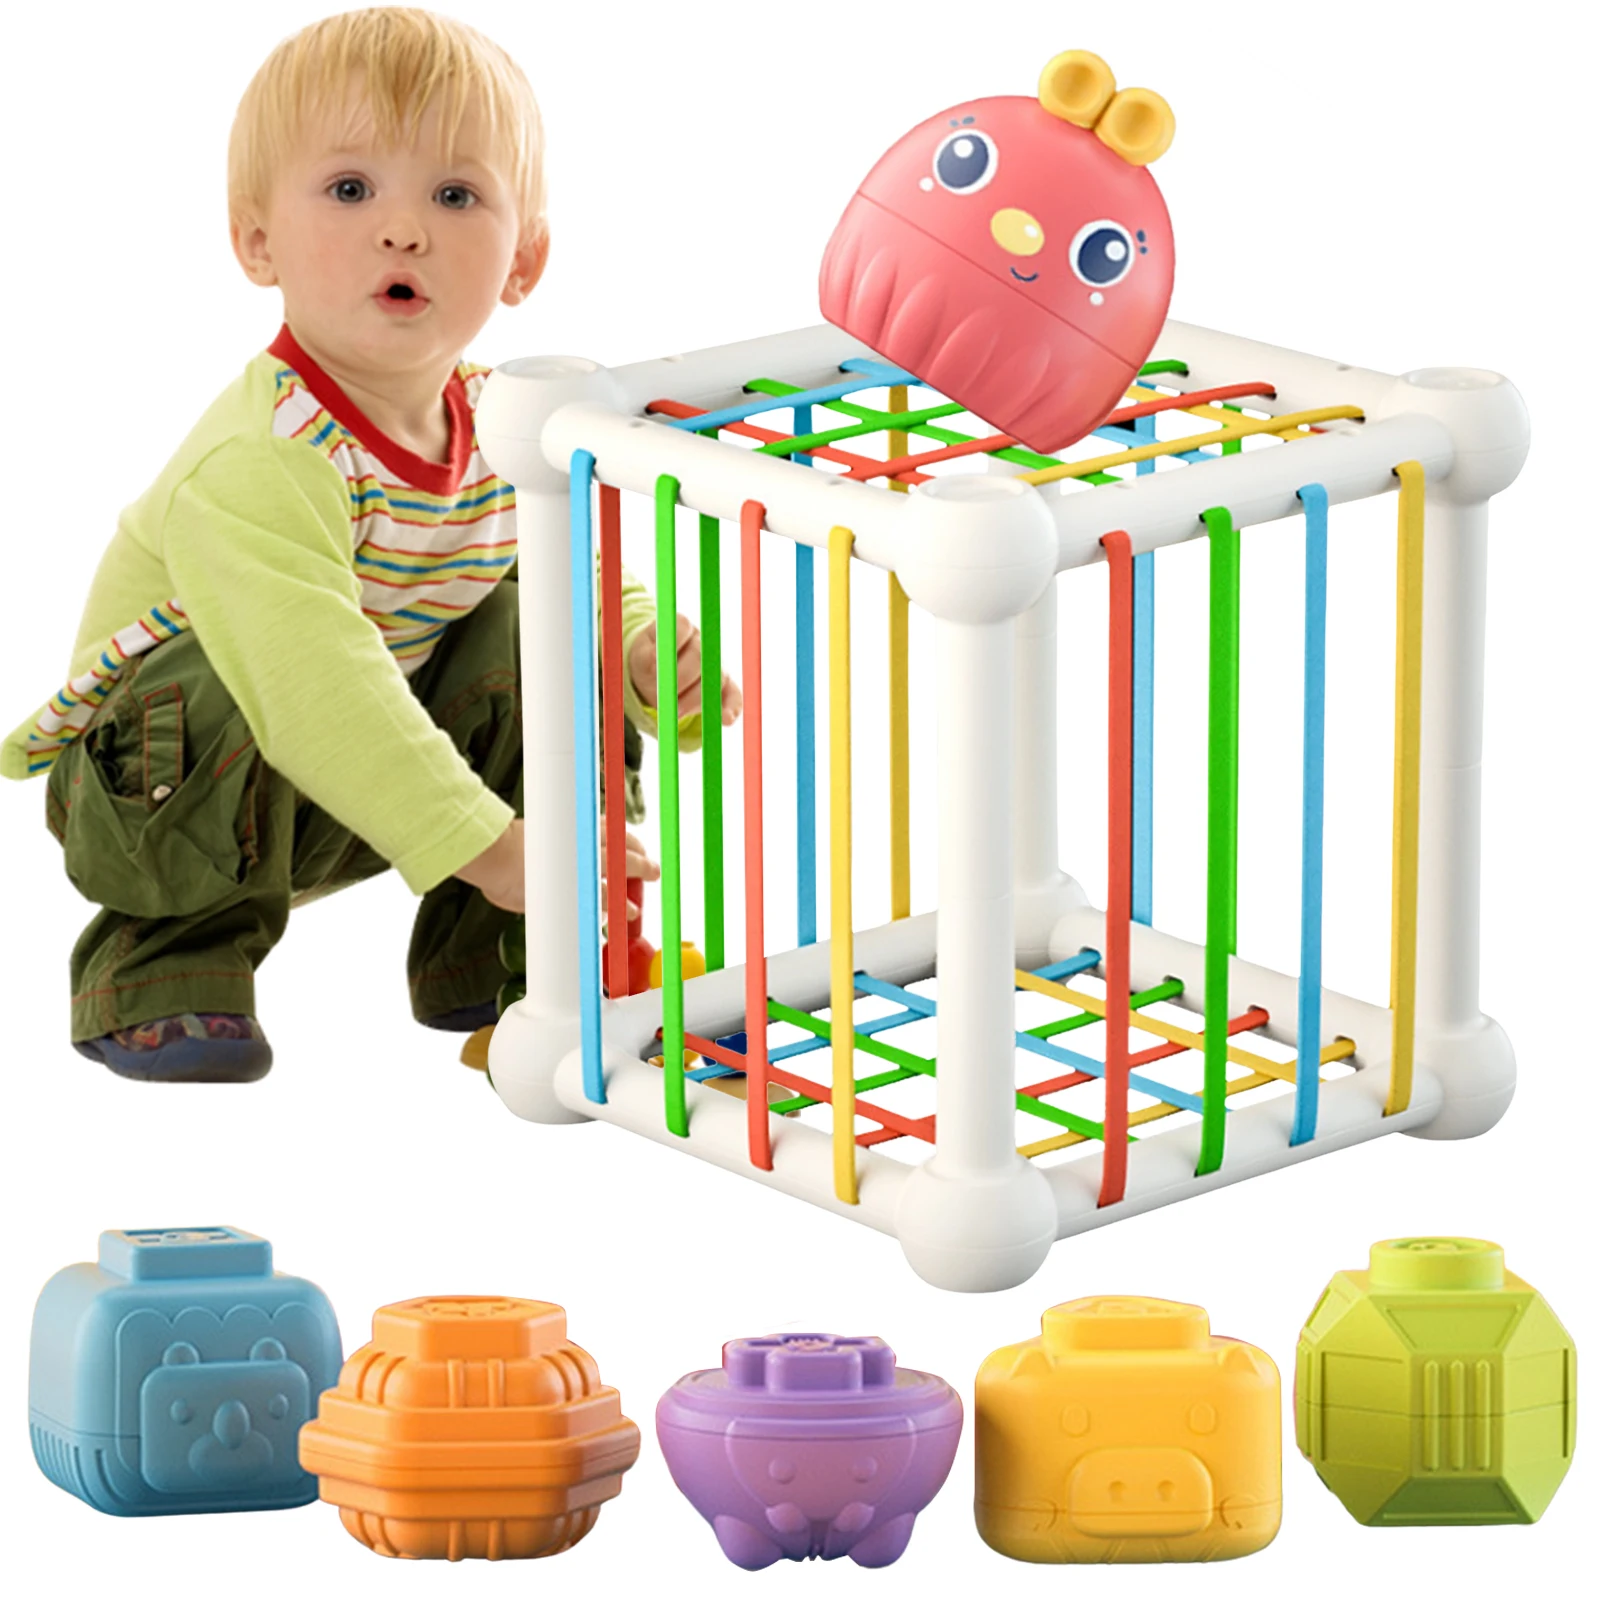 

Baby Shape Sorter Toys Colorful Cube Sorting Bin With Elastic Bands Montessori Learning Activity For Fine Motor Skills Color